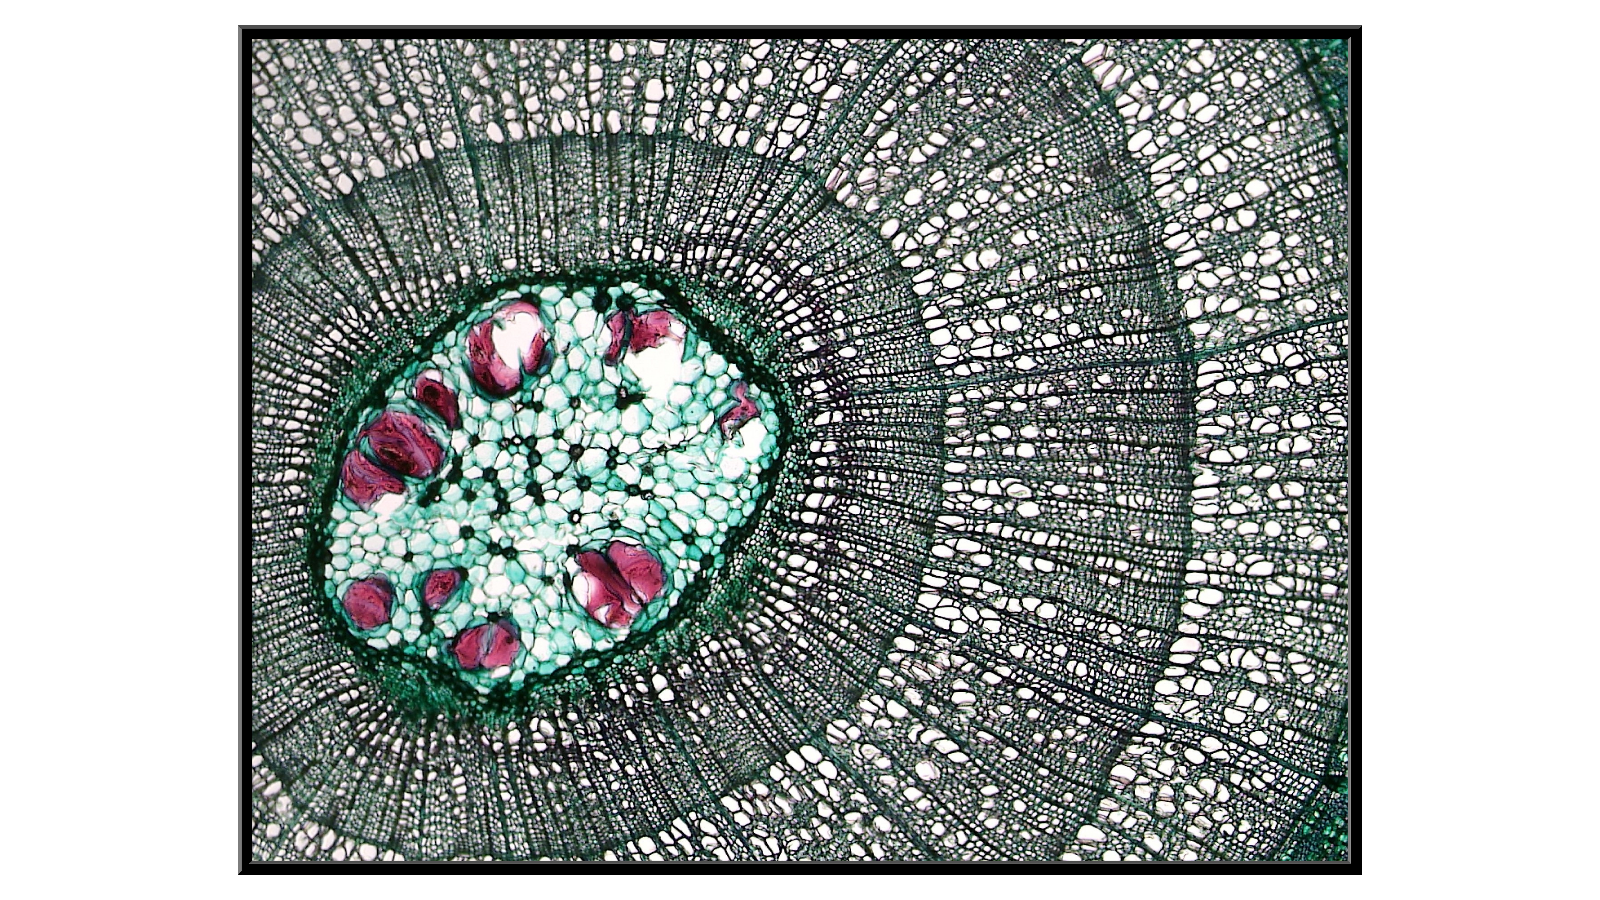 Cross-section of a three-year-old Tilia branch - 2